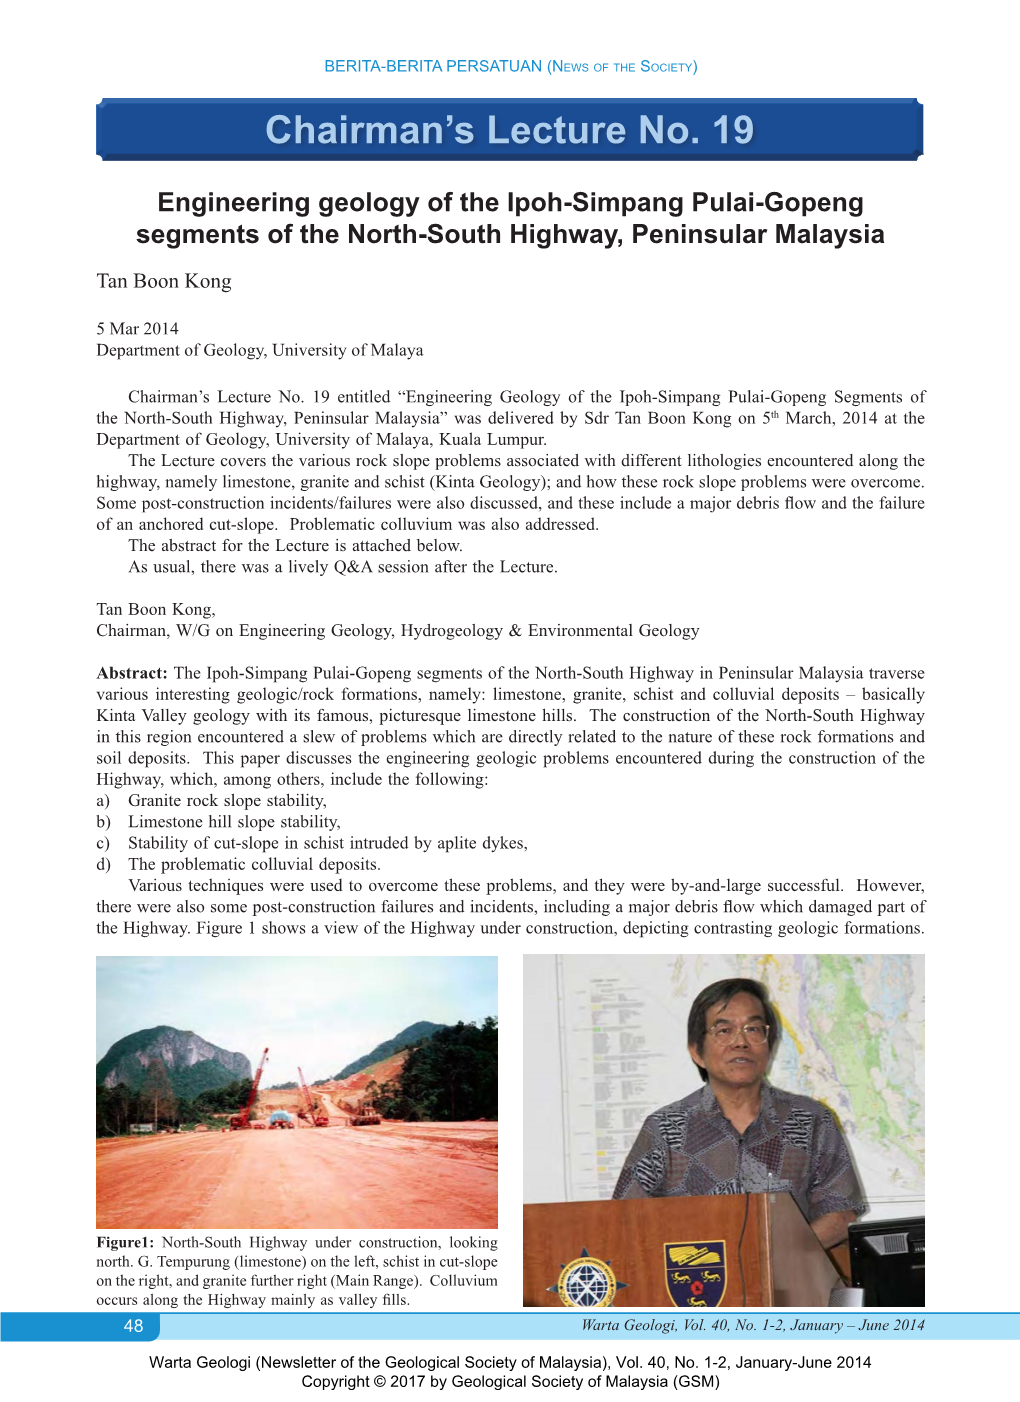 Abstract: Engineering Geology of the Ipoh-Simpang Pulai-Gopeng Segments of the North-South Highway, Peninsular Malaysia